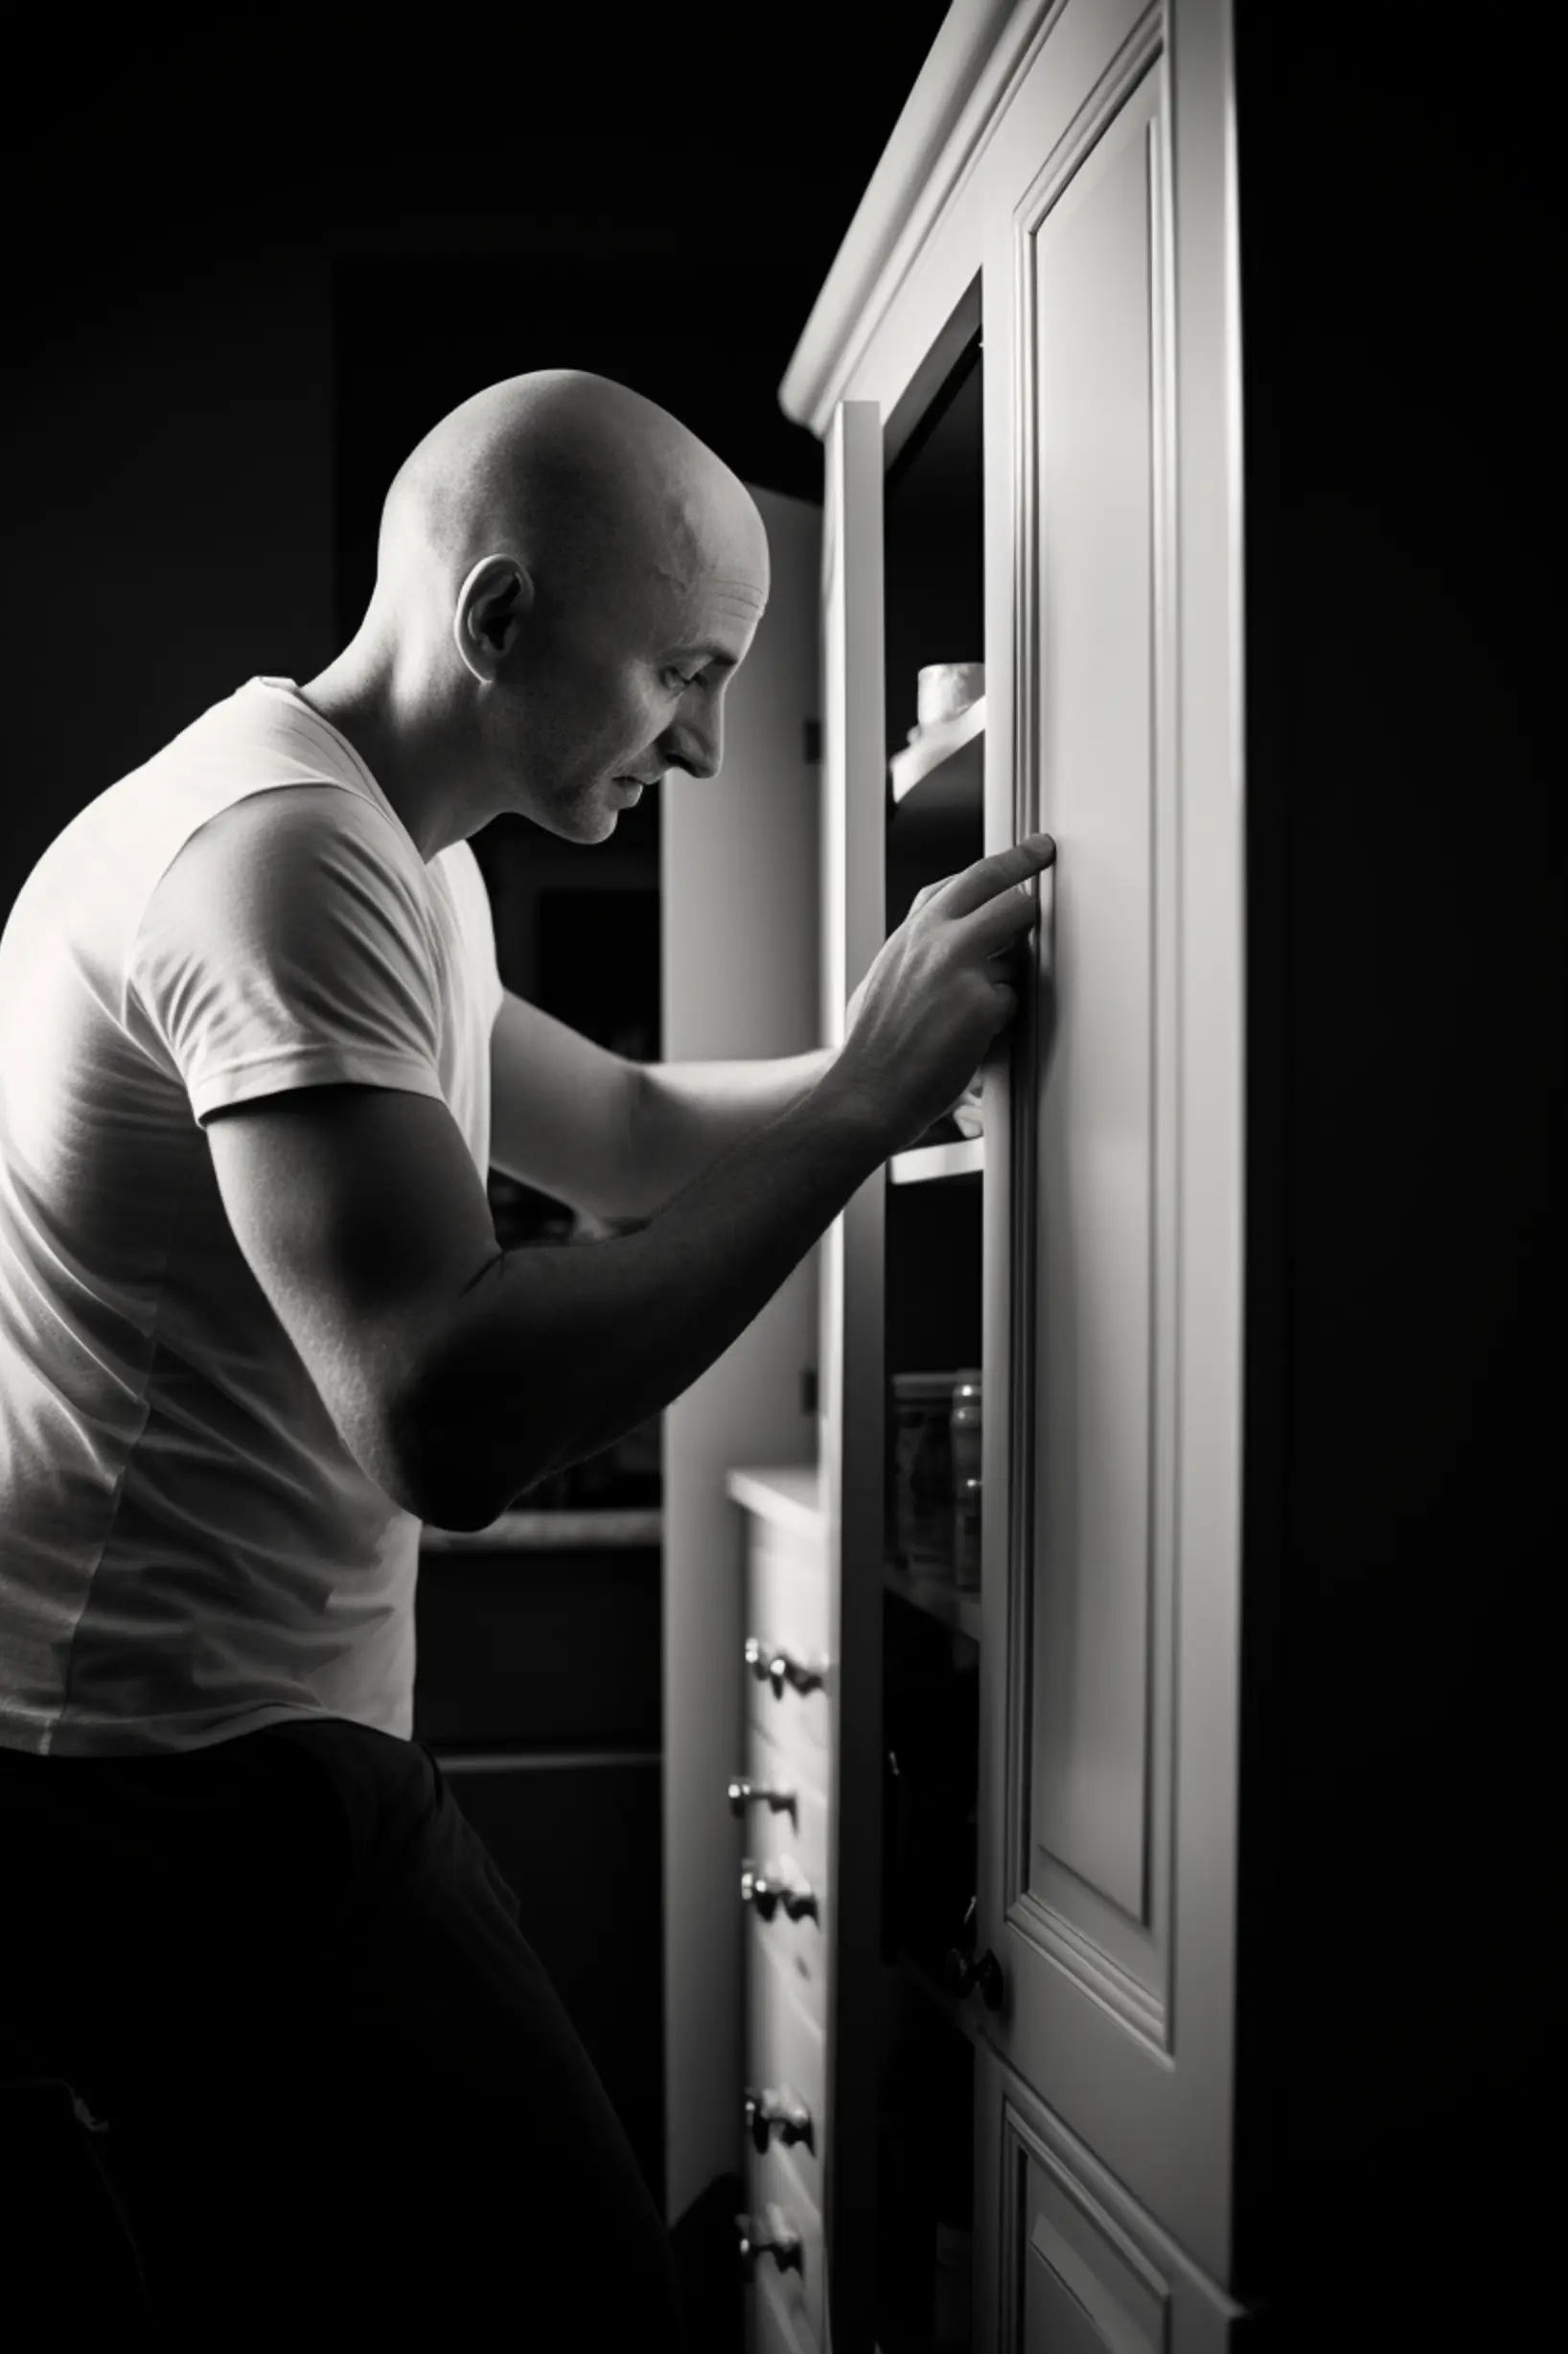 bald man getting items out of a medicine cabinet